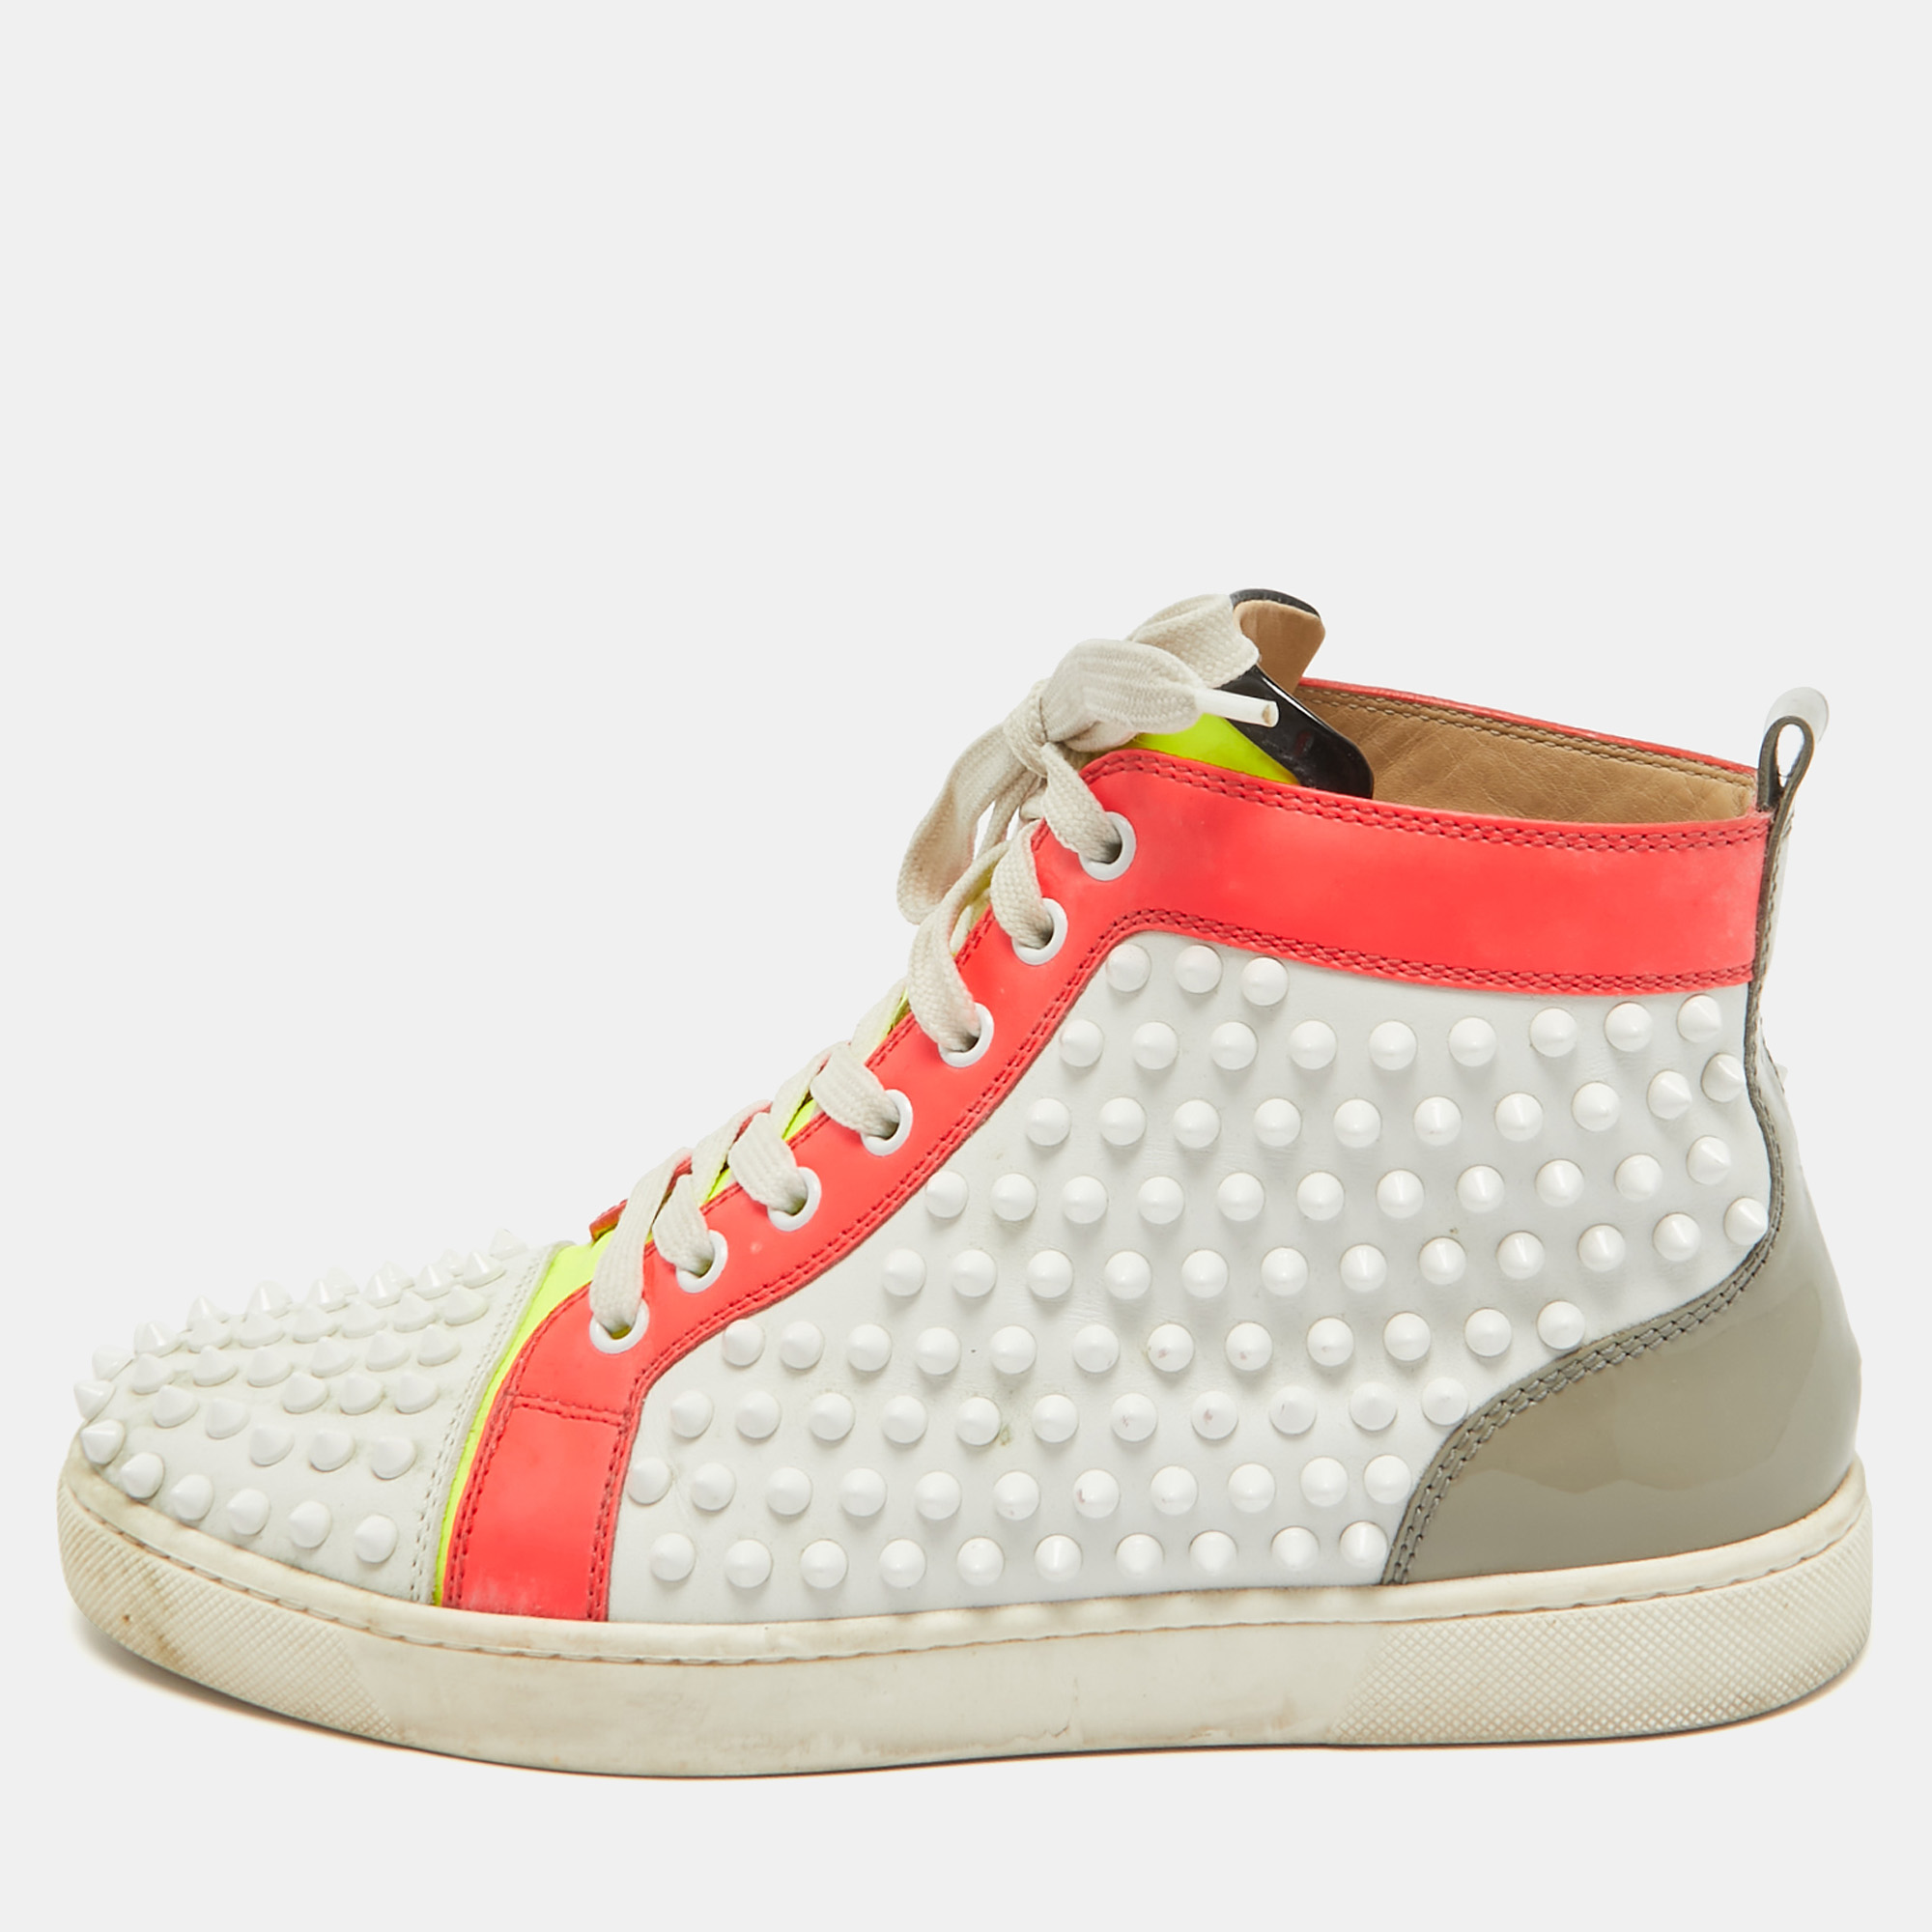 Christian louboutin neon multicolor leather louis spikes sneakers size 40